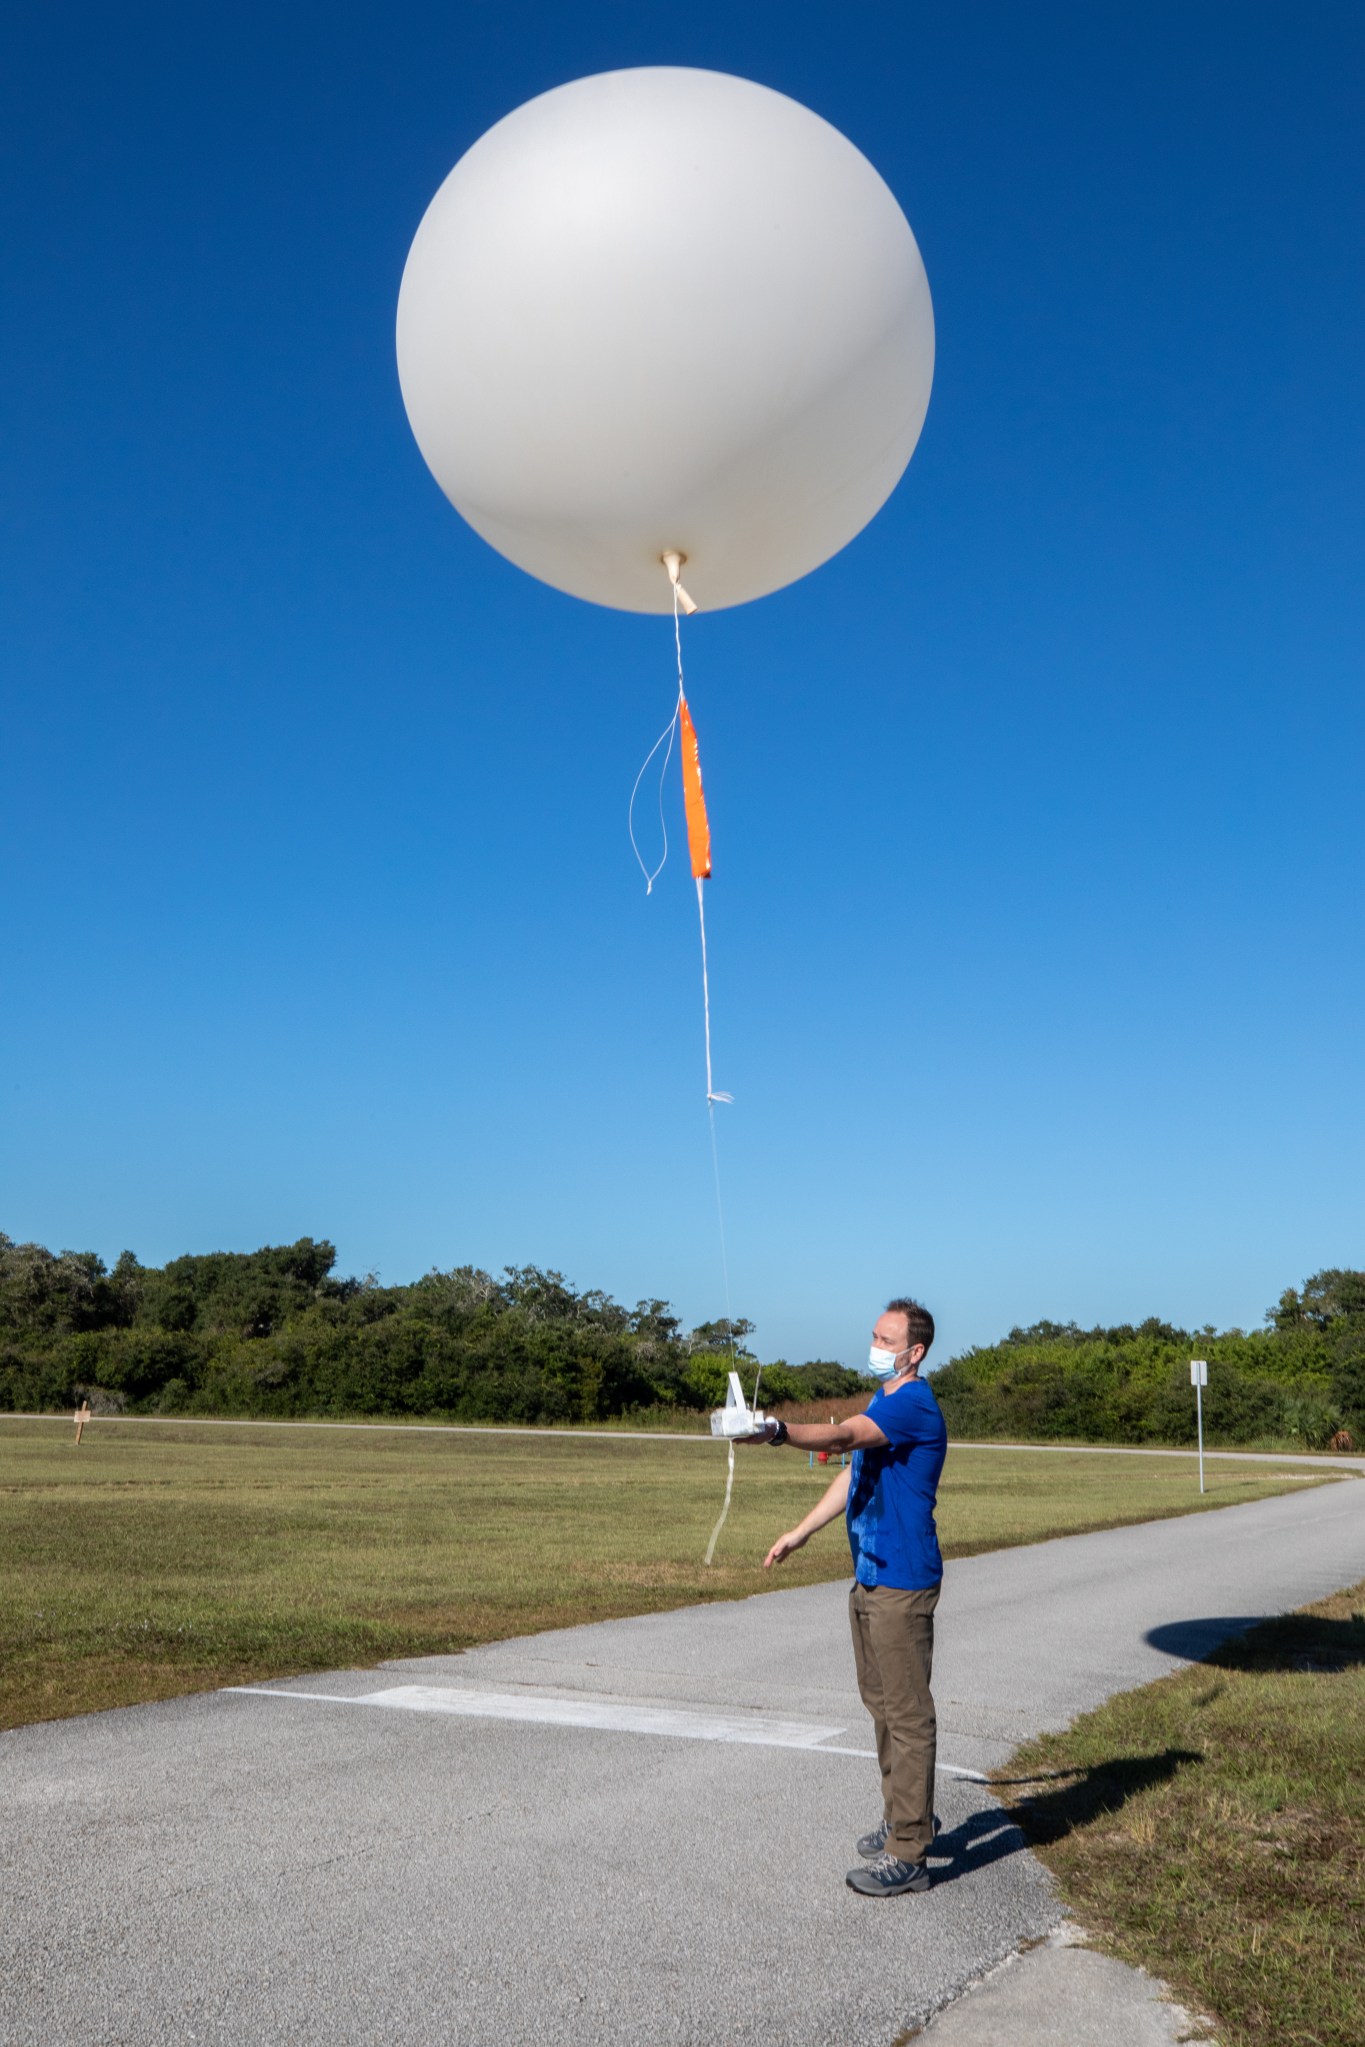 Releasing a weather balloon at Cape Canaveral Space Force Station